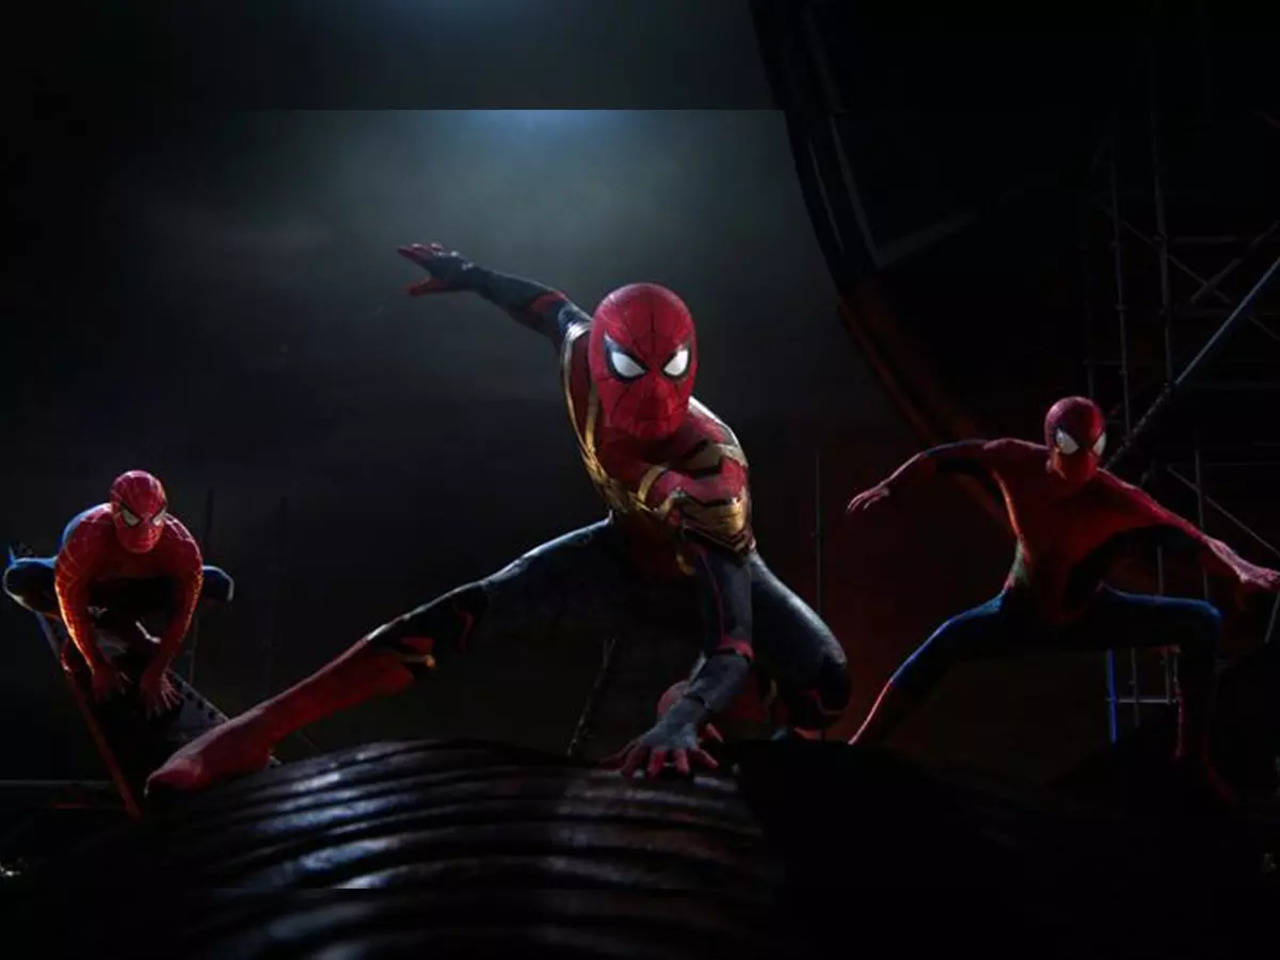 Spider: Man No Way Home Passes Avatar at All-Time Box Office